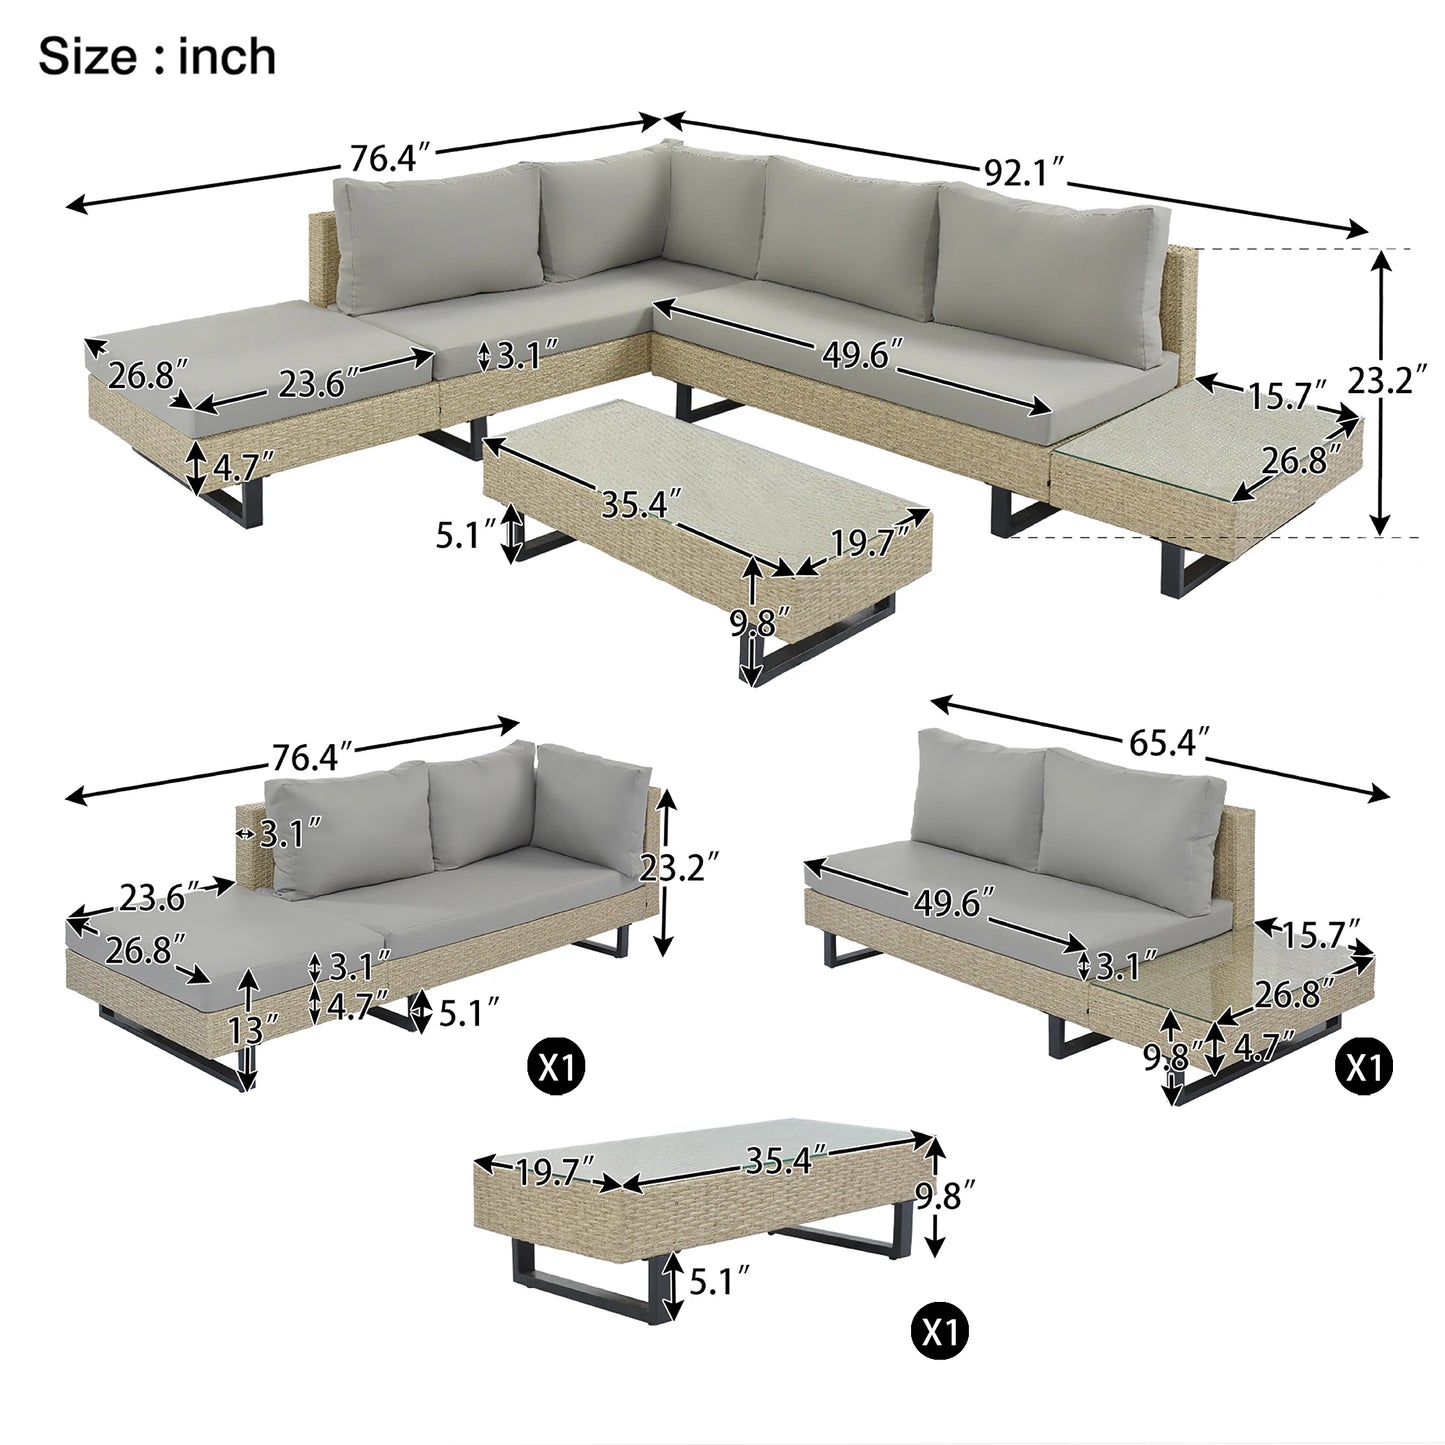 3-piece Outdoor Wicker Sofa Patio Furniture Set, L-shaped Corner Sofa, Water And UV Protected Two Glass Table